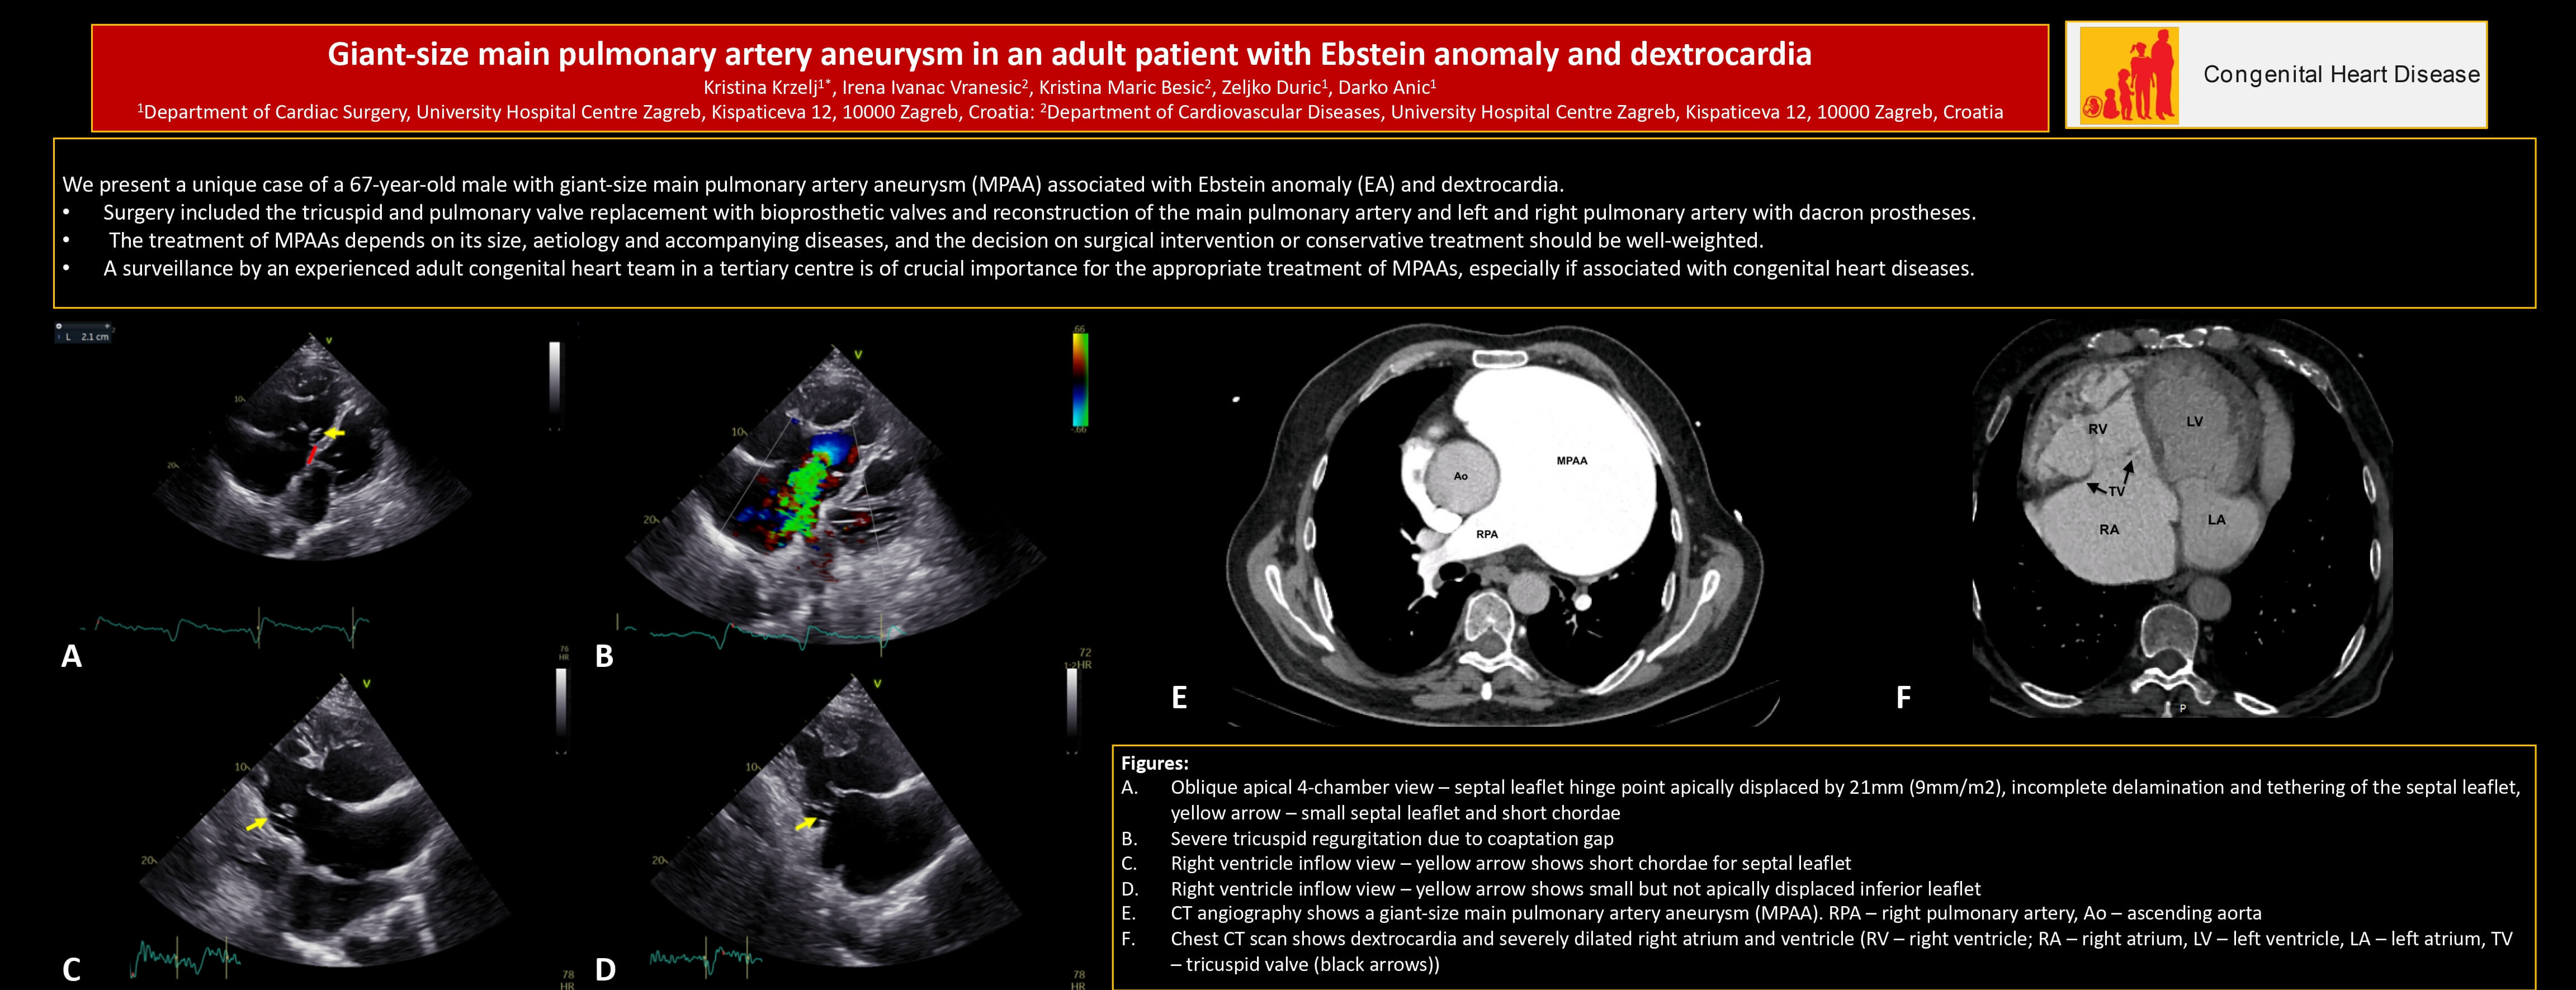 Giant-Size Main Pulmonary Artery Aneurysm in an Adult Patient with Ebstein Anomaly and Dextrocardia